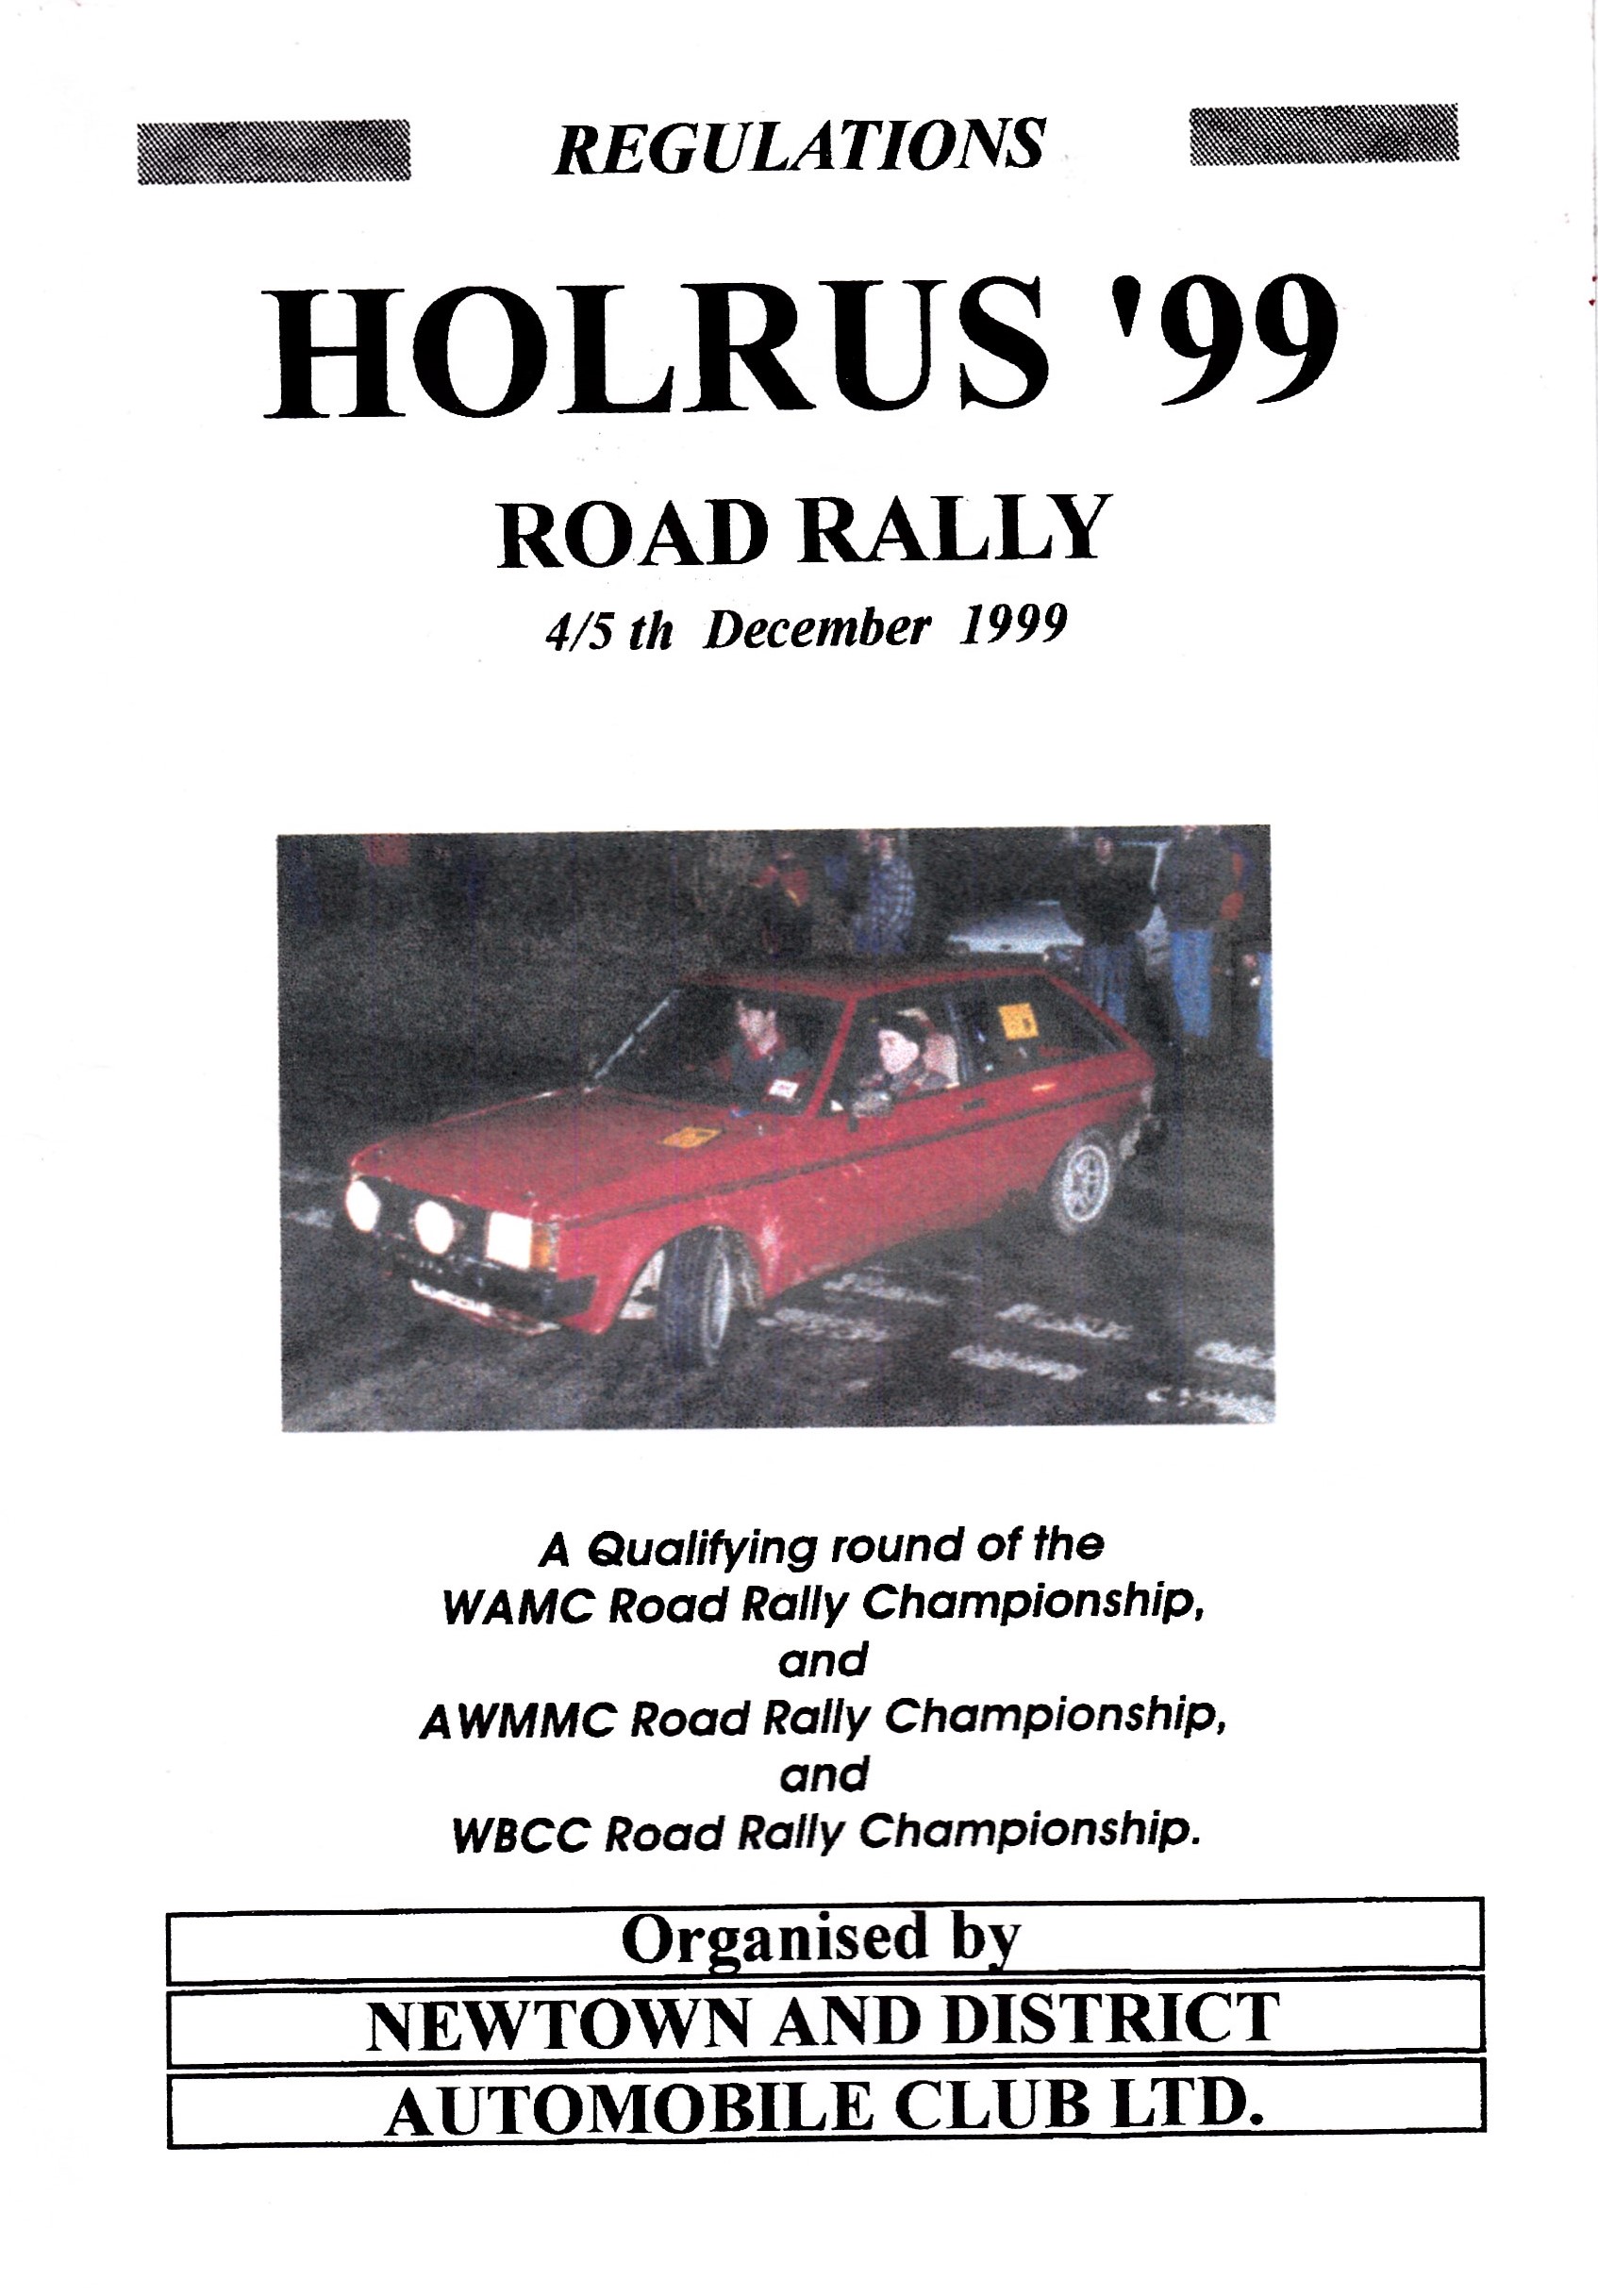 Holrus '99 Road Rally